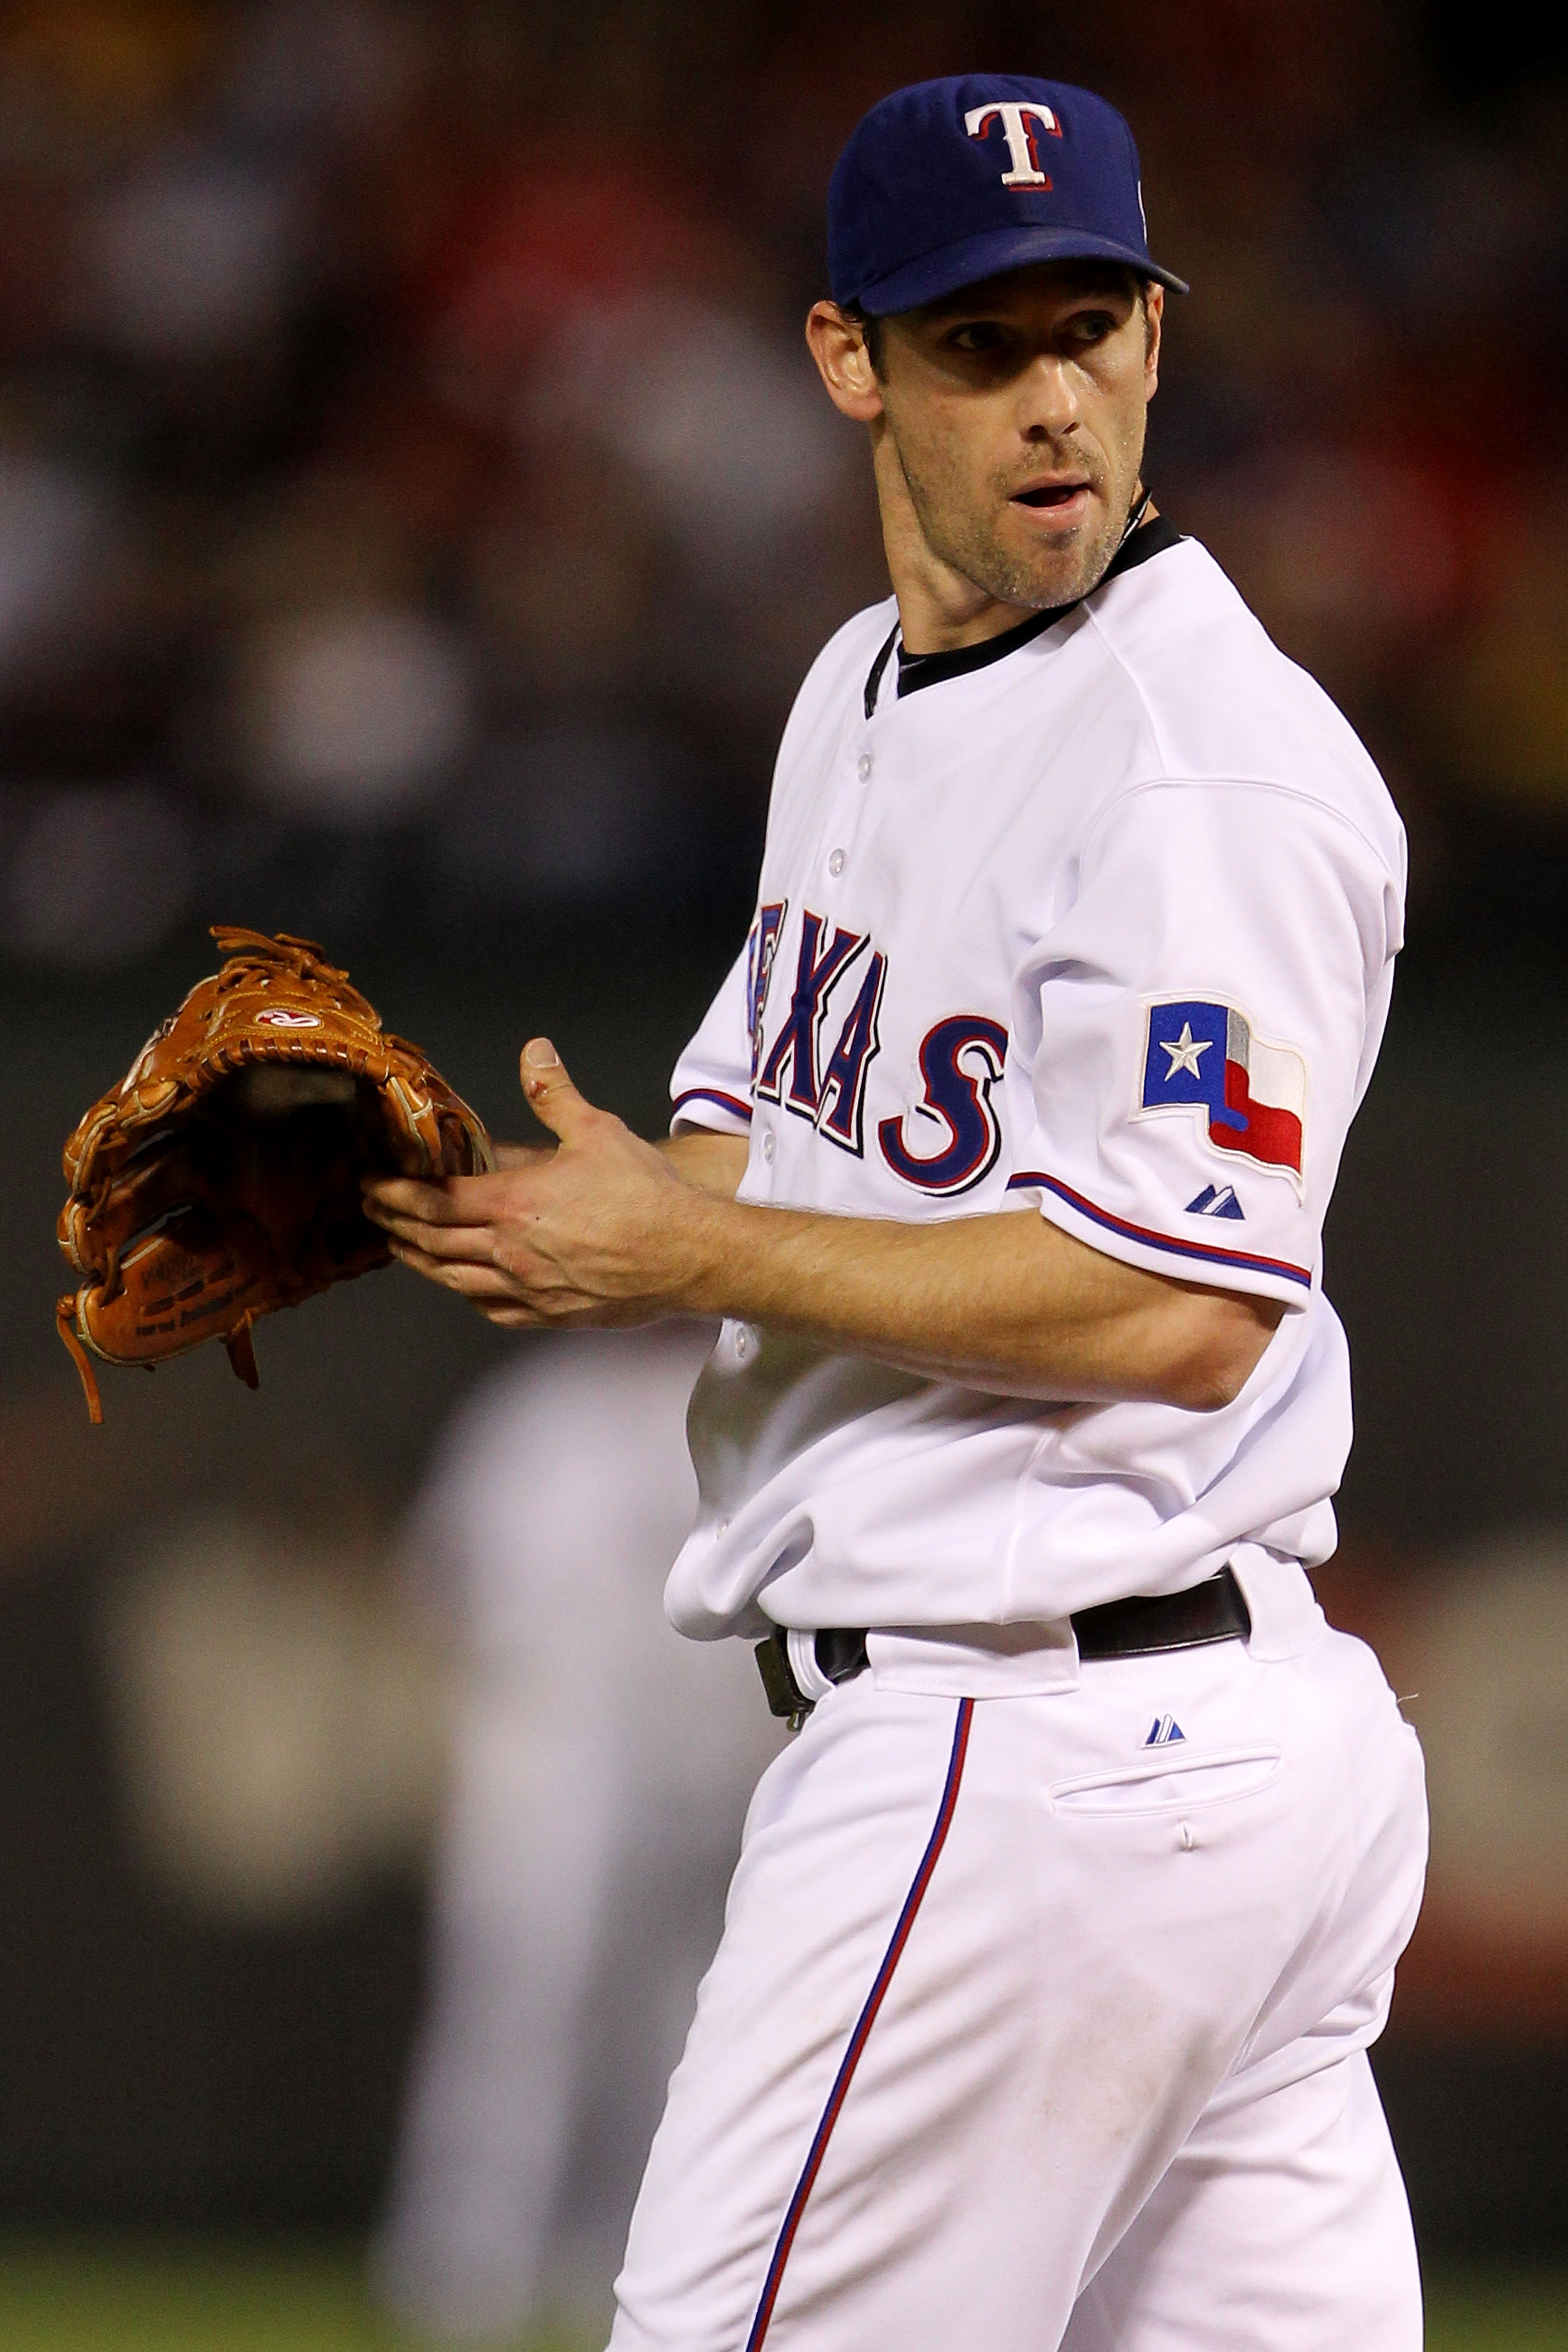 ARLINGTON, TX - NOVEMBER 01:  Cliff Lee #33 of the Texas Rangers looks on from behind the mind against the San Francisco Giants in Game Five of the 2010 MLB World Series at Rangers Ballpark in Arlington on November 1, 2010 in Arlington, Texas.  (Photo by